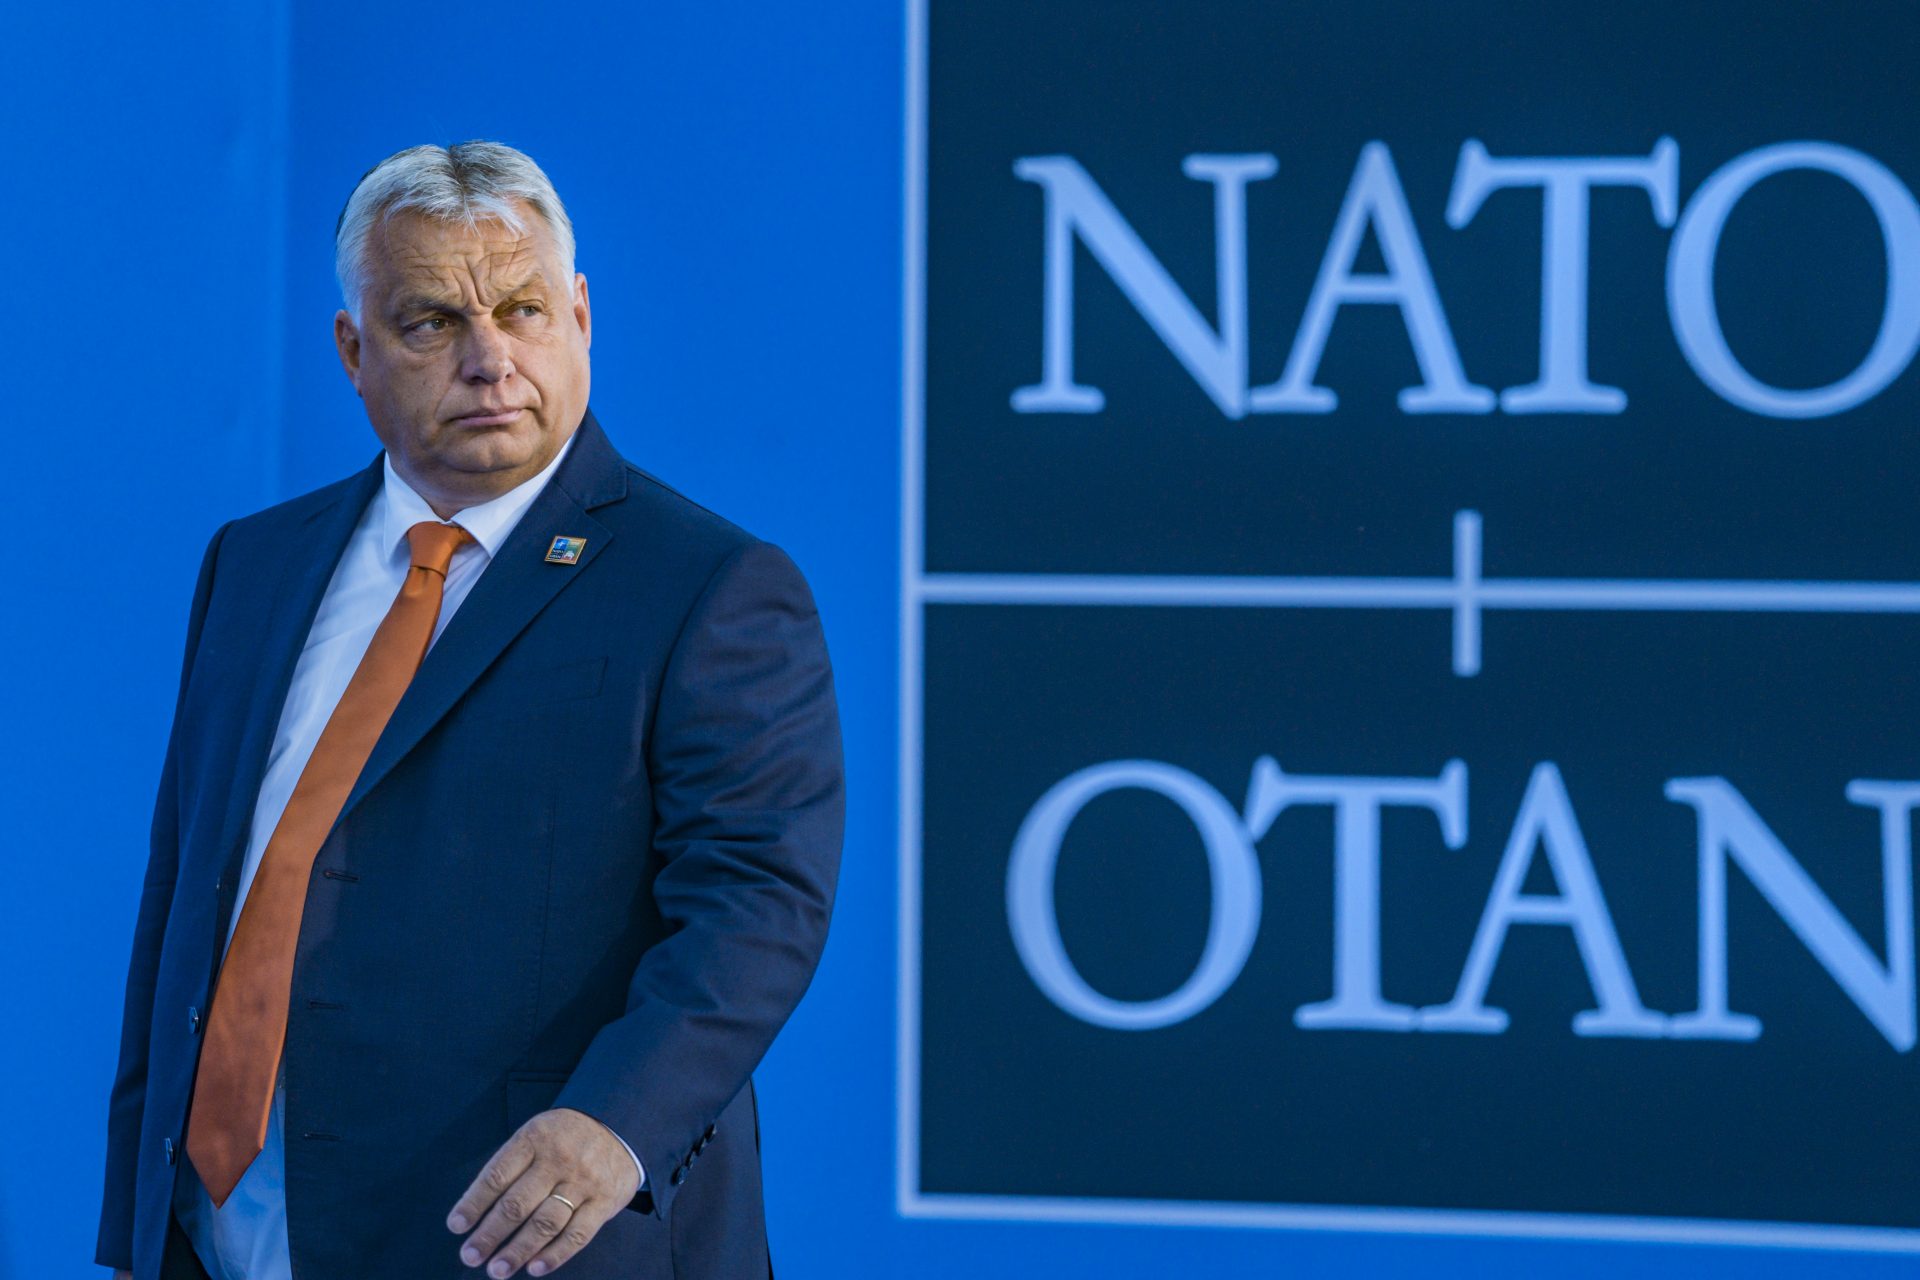 Orbán’s messaging on peace